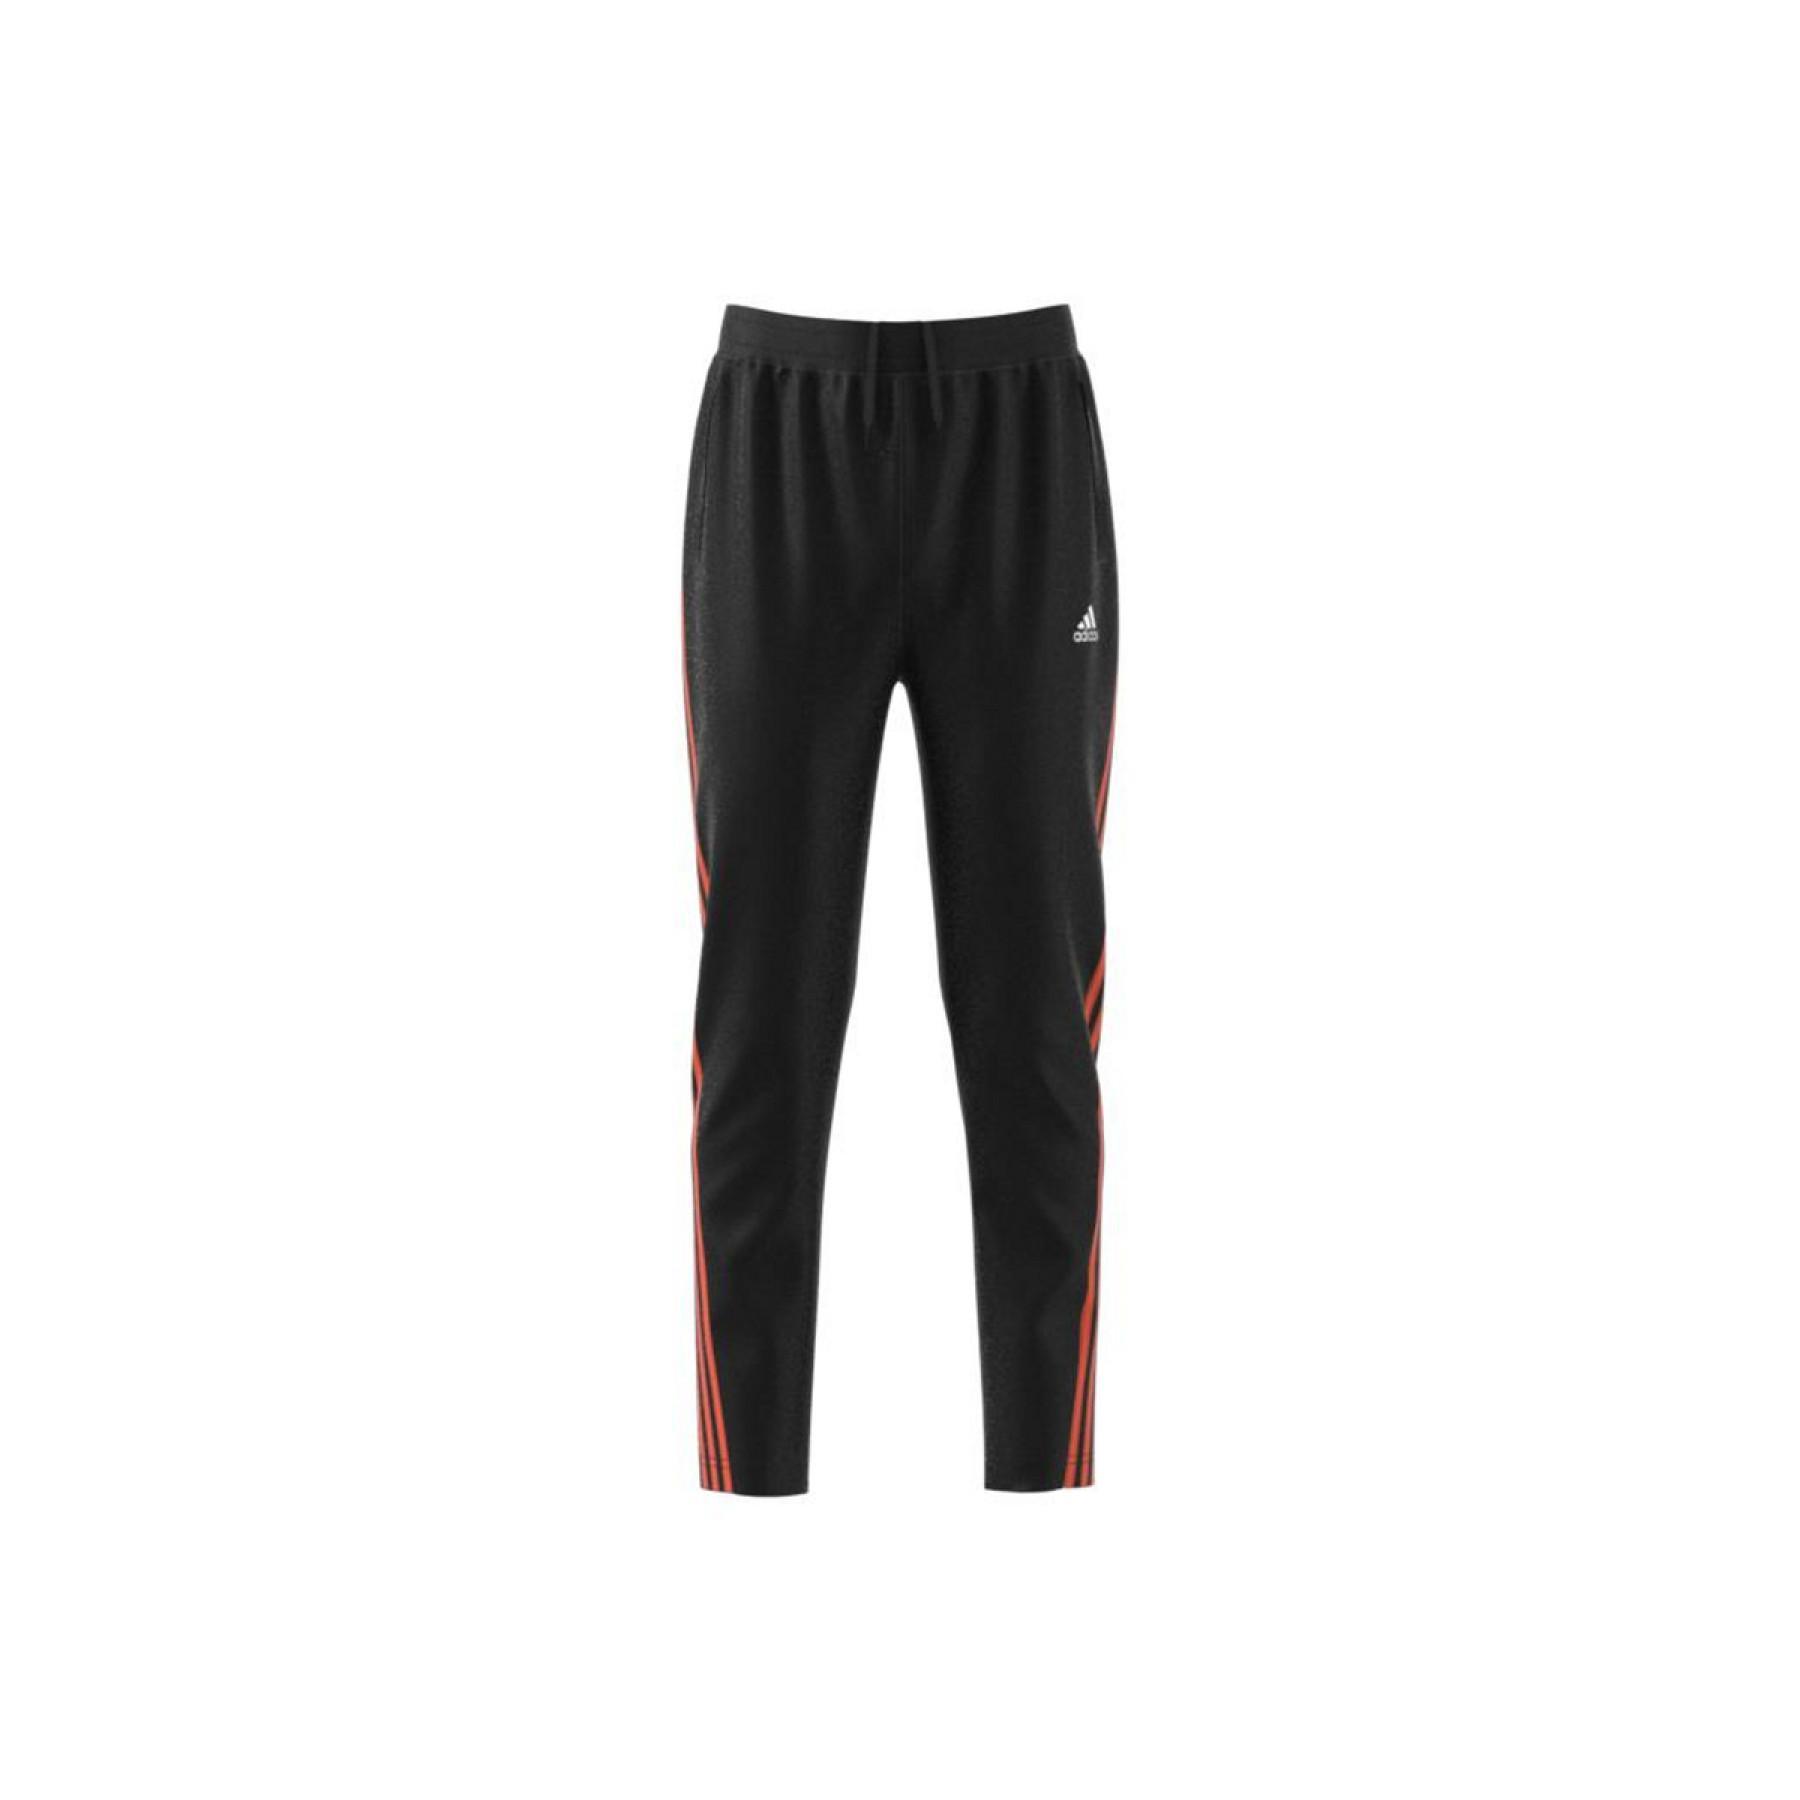 Children's trousers adidas 3-Bandes Doubleknit Tapered Leg